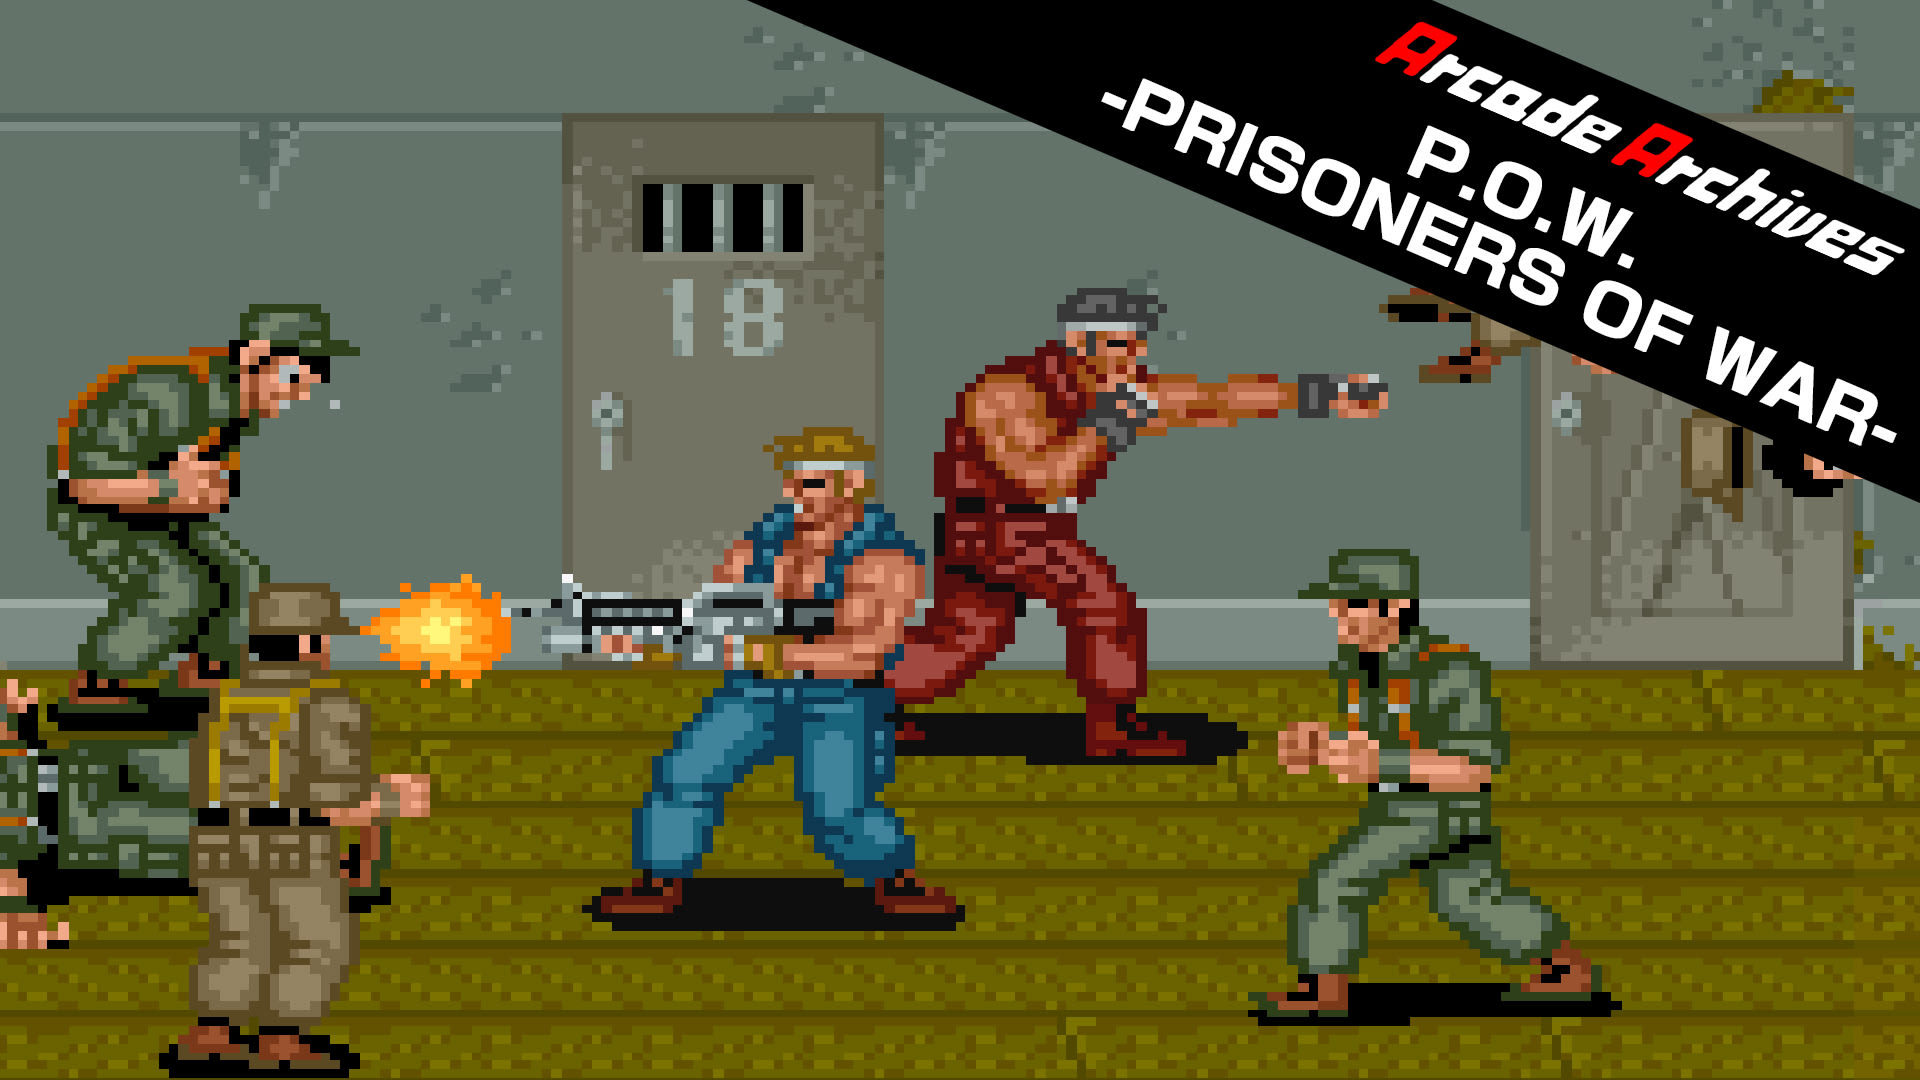 Arcade Archives P.O.W. -PRISONERS OF WAR- 1